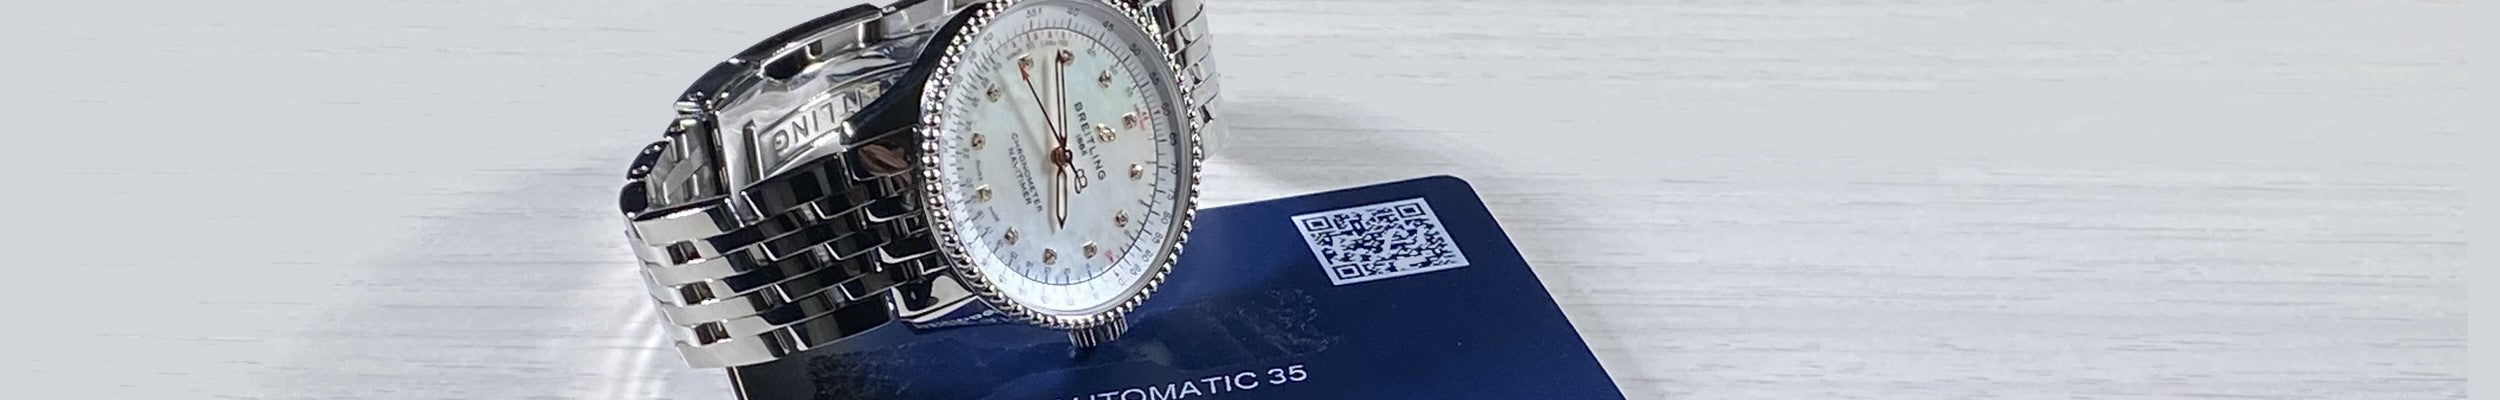 Pre-owned Breitling Navitimer 35 lying on its warranty card.